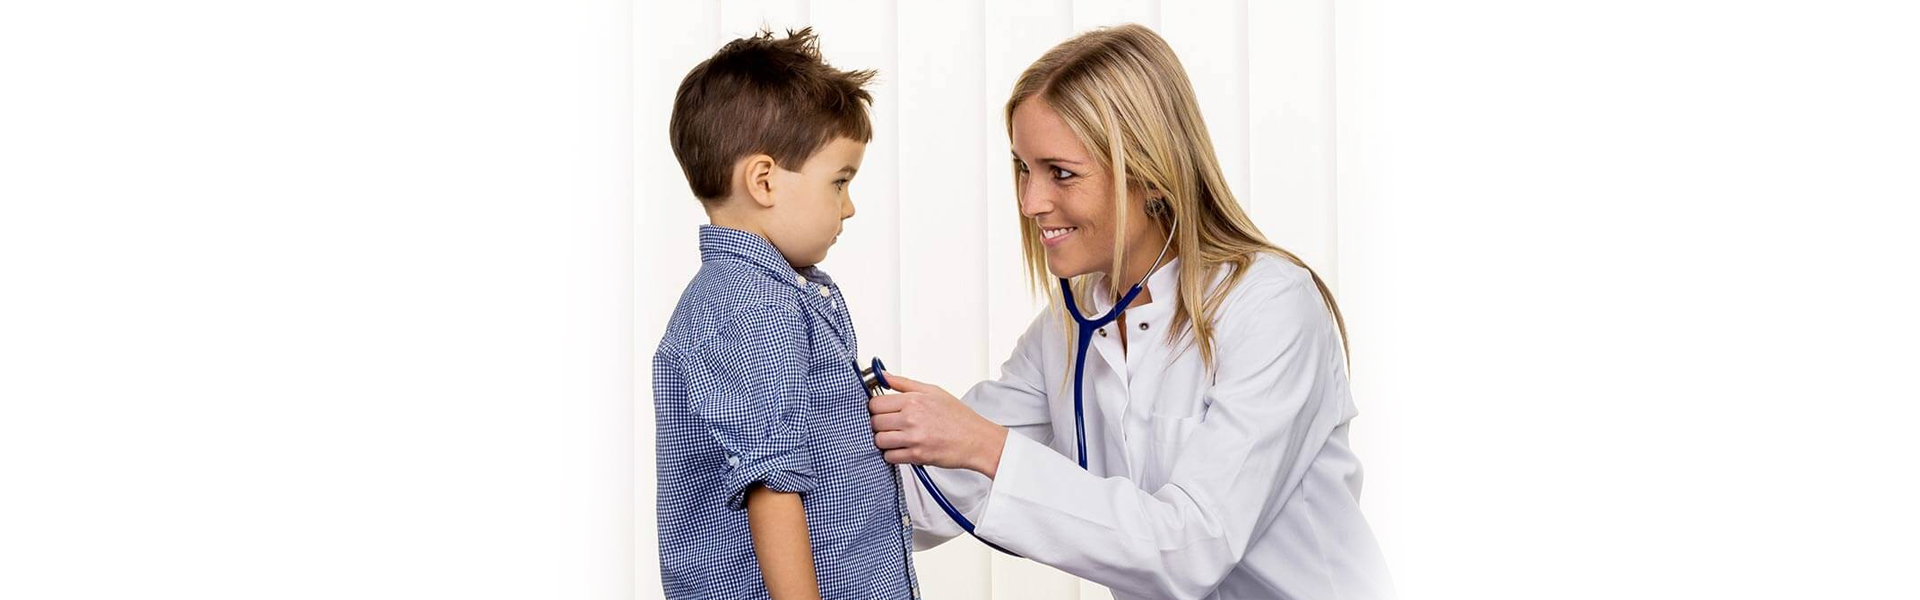 Importance of Pediatric Cardiology